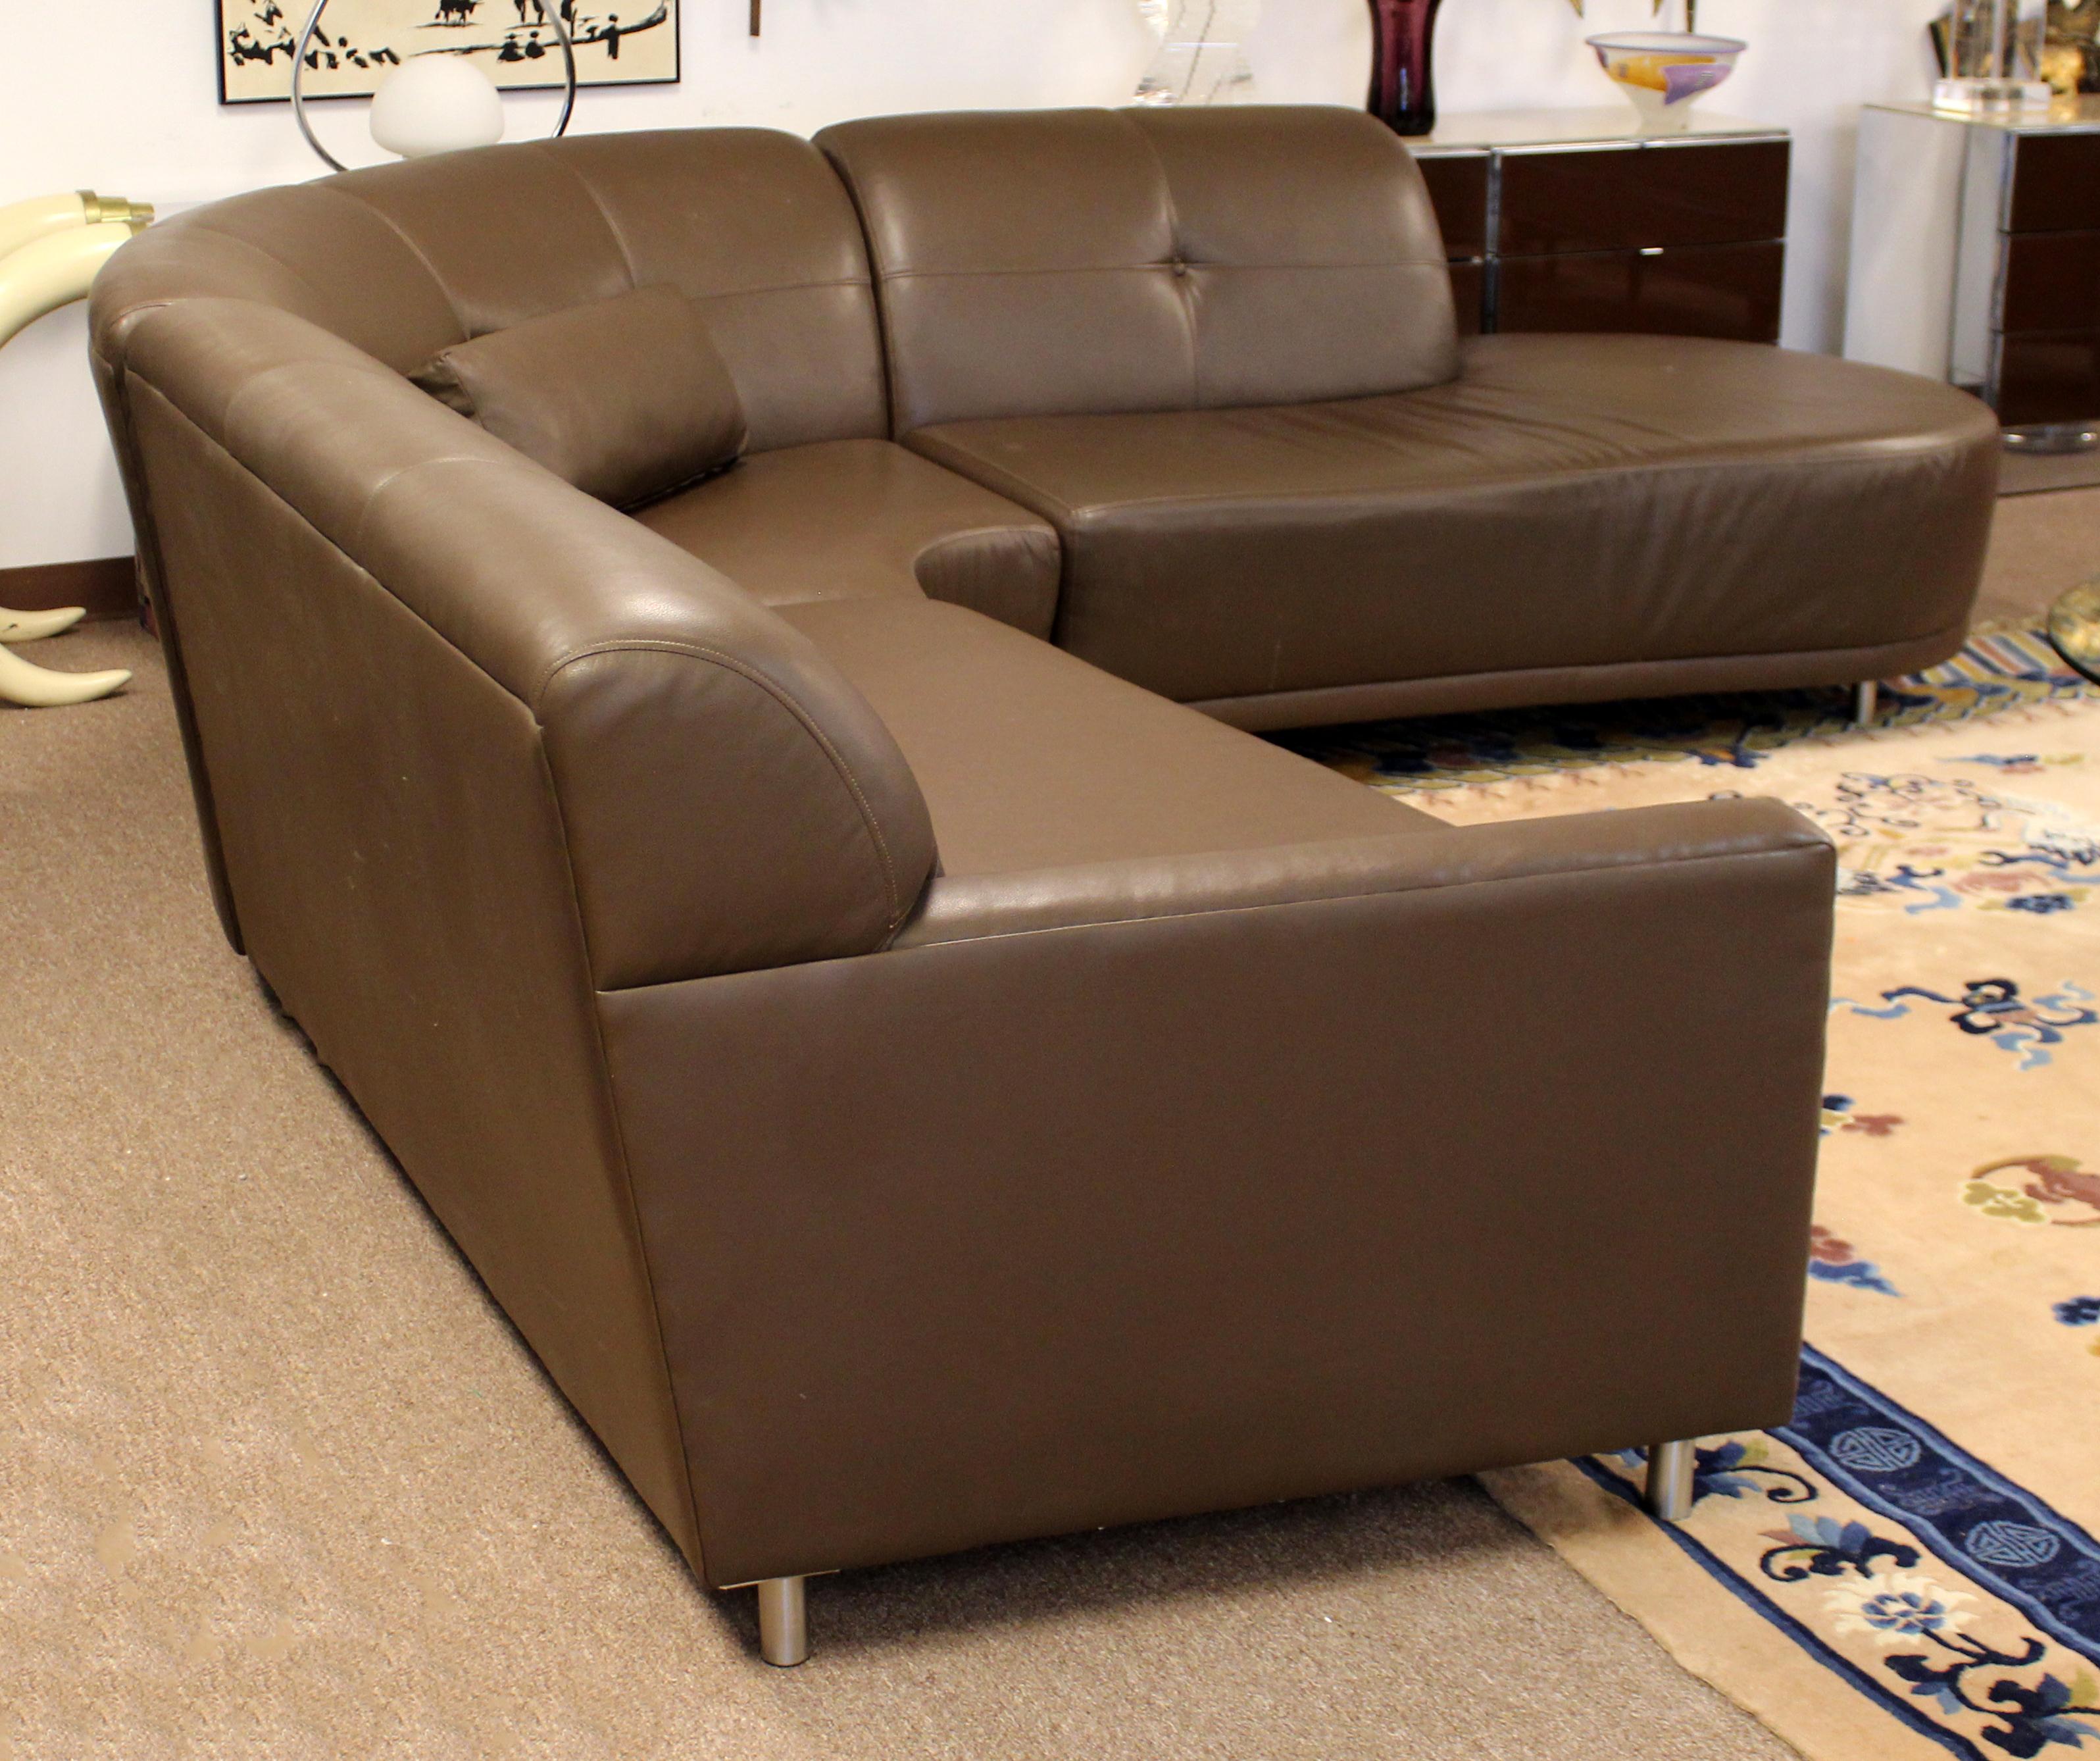 American Contemporary Modern Brown Leather 3 Pc Curved Sectional Sofa